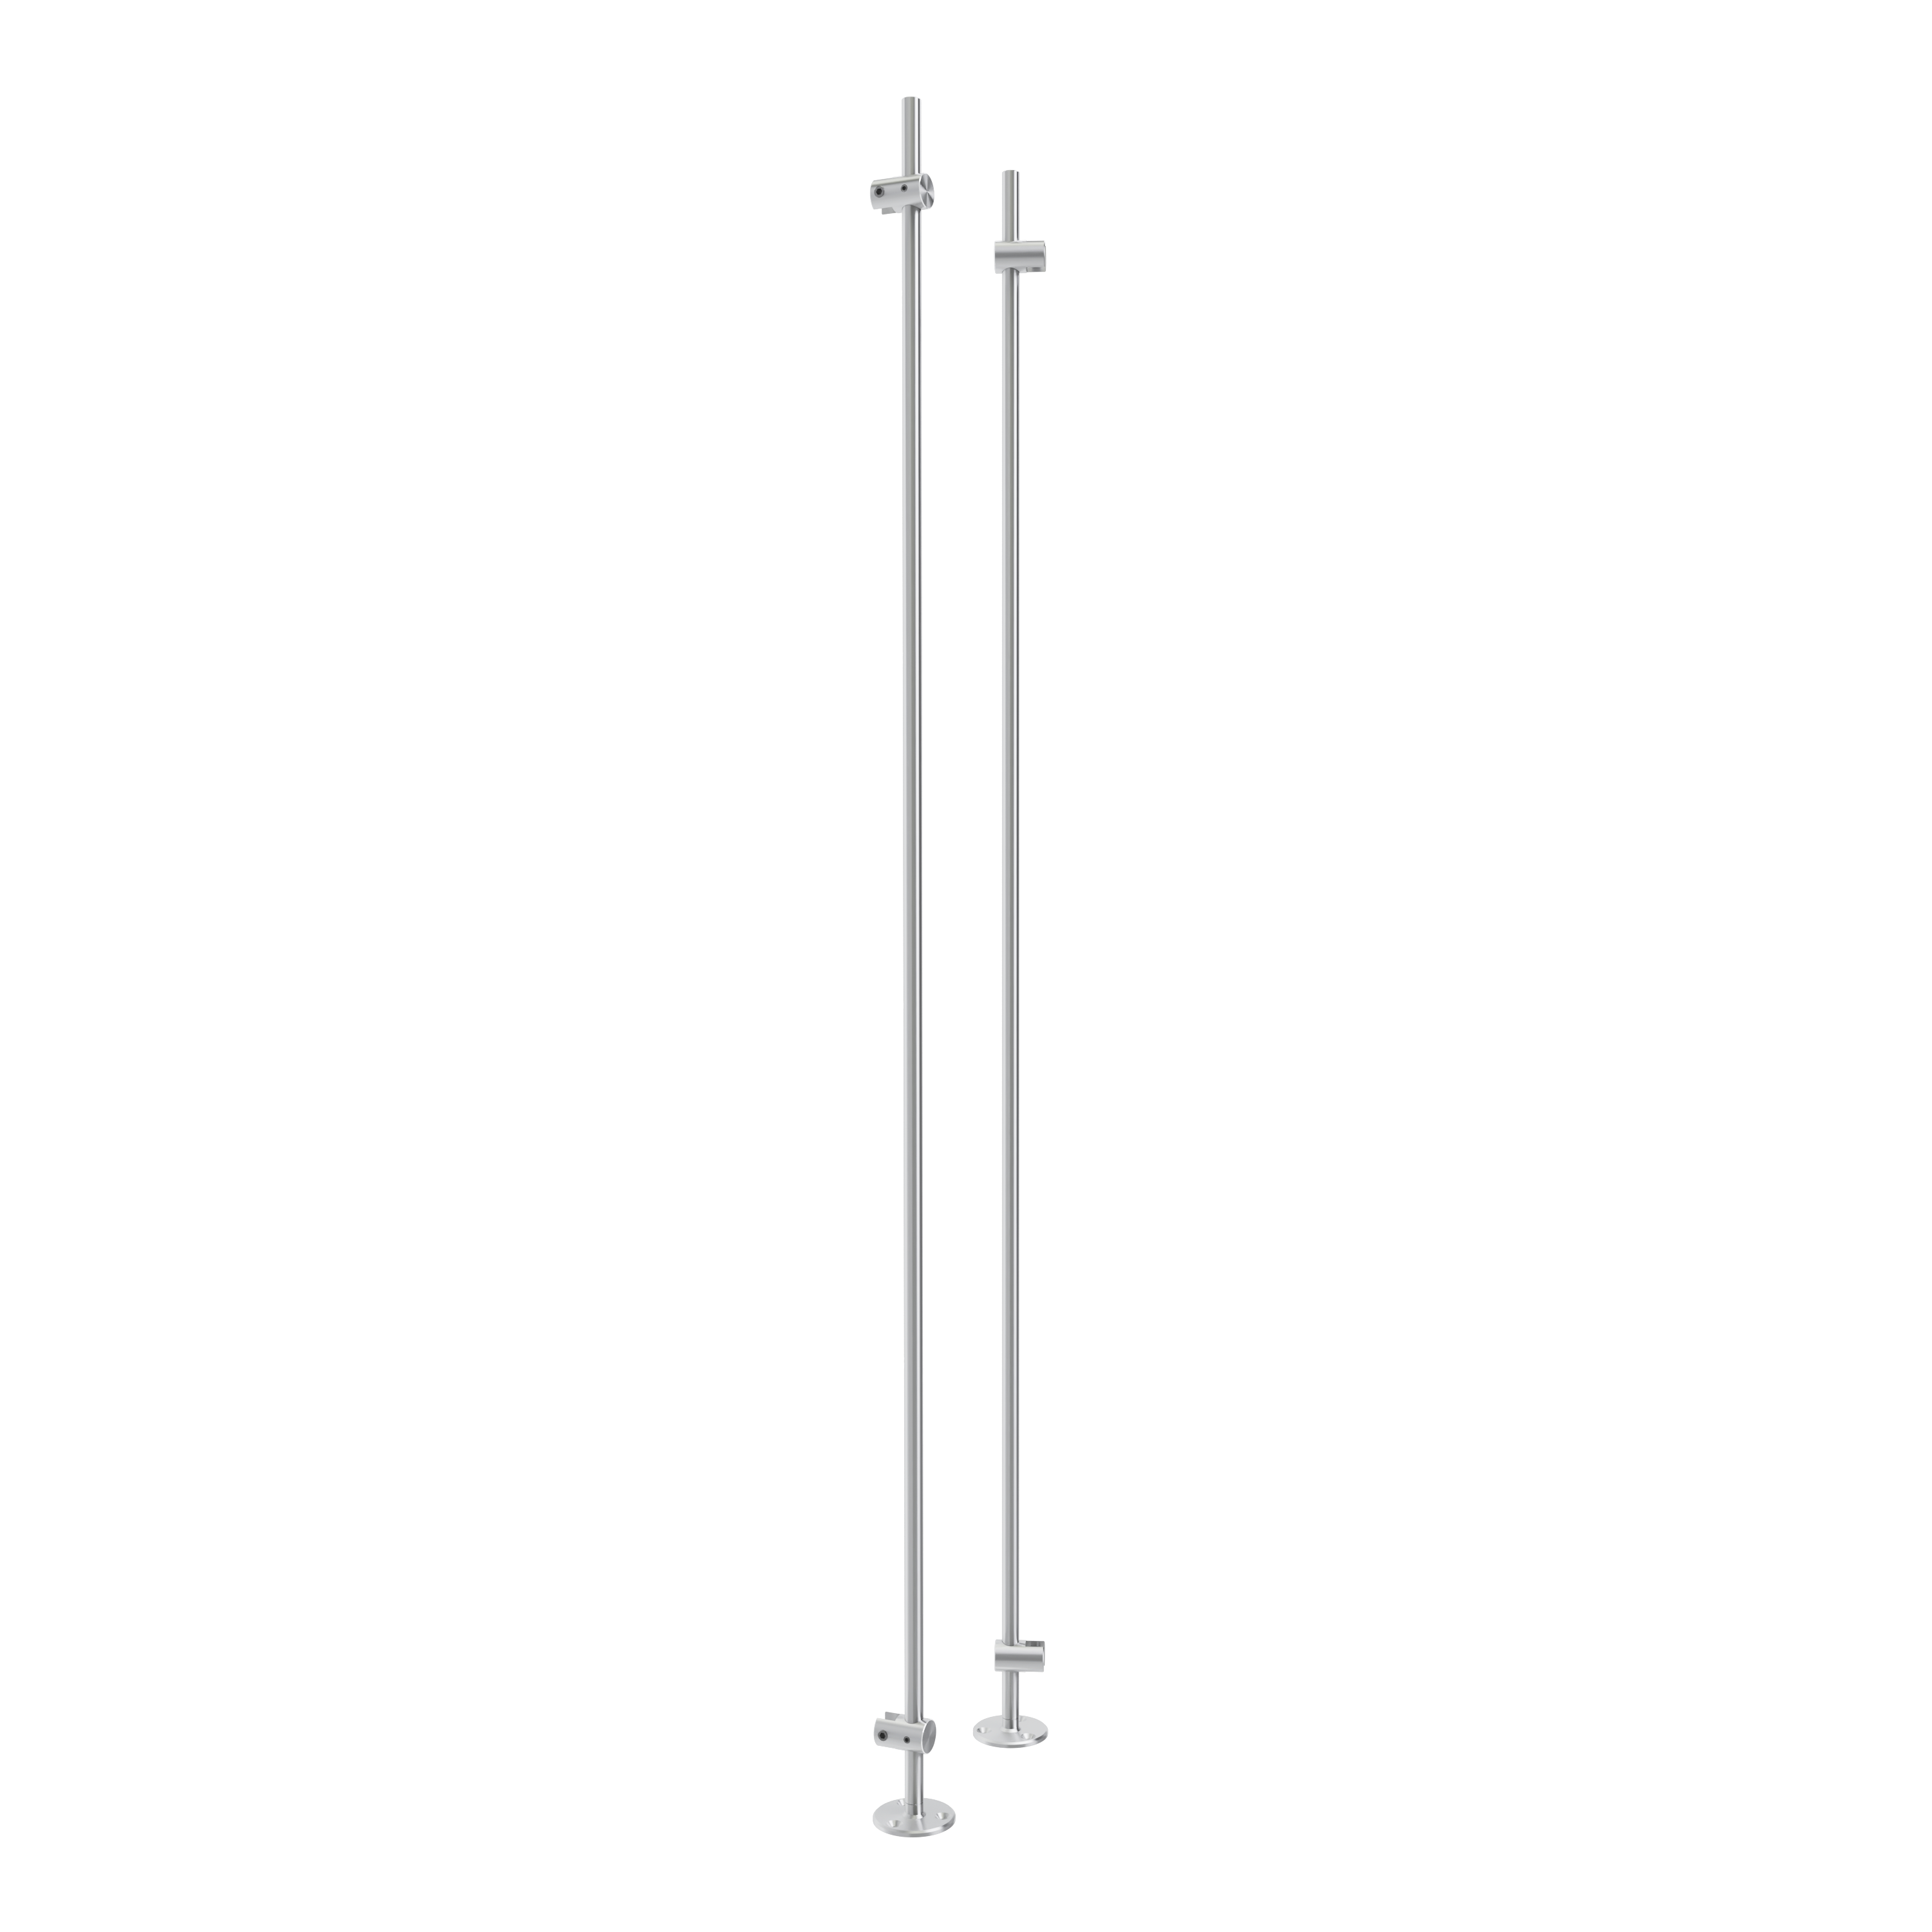 Set of 2, 3/8’’ Diameter Rod Projecting Mount, Aluminum Clear Anodized Finish, 36'' Long w/ 3 Holes Mounting Plate, to be installed with screws (Included) or double sided tape (not included). Hold up to 5/16'' material thickness.